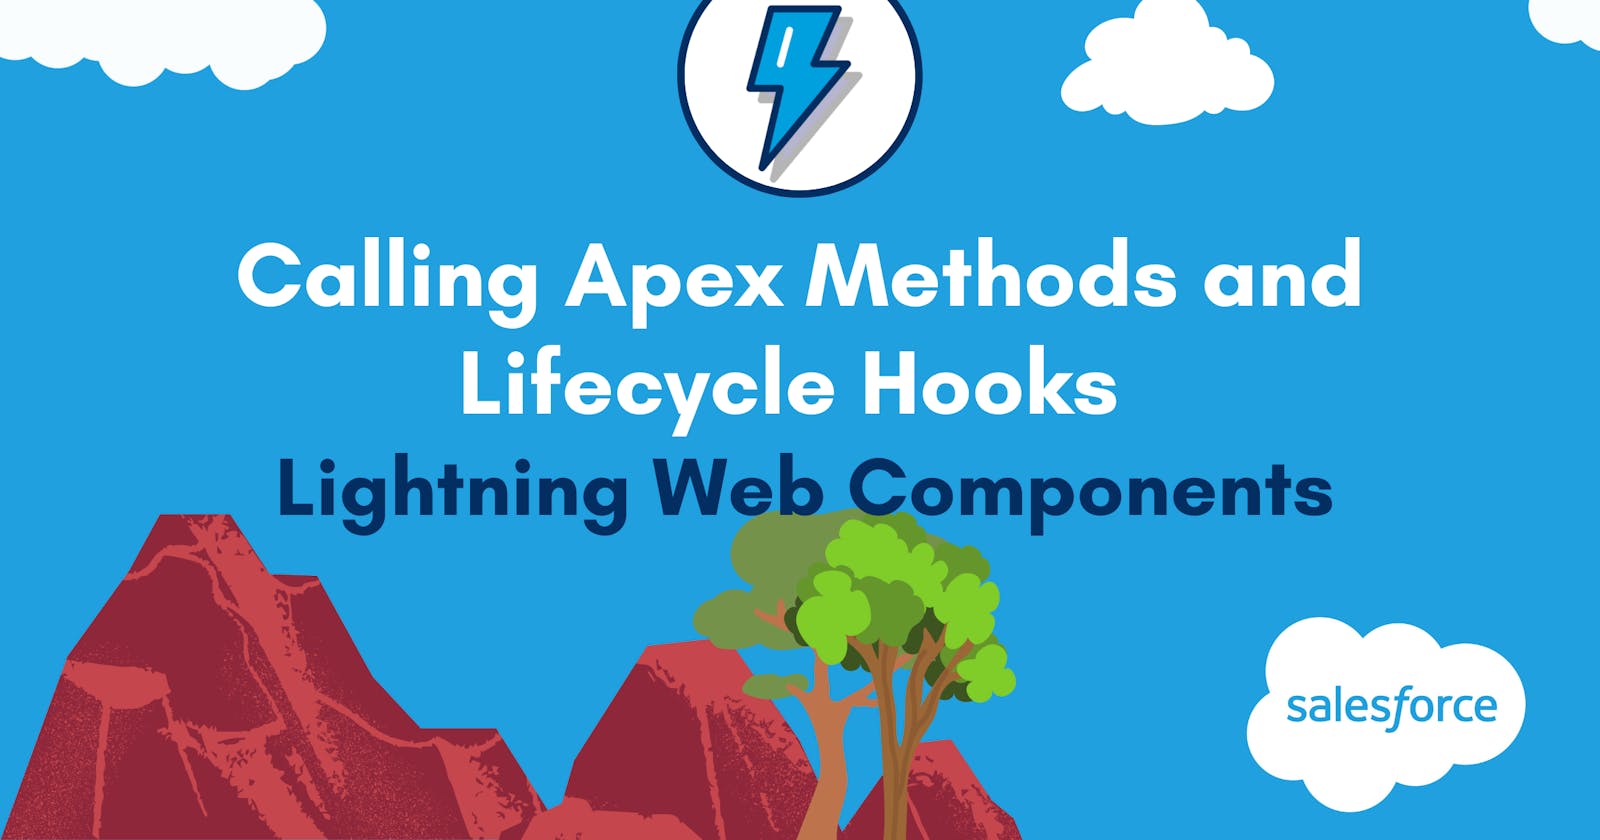 Calling Apex Methods and Lifecycle Hooks